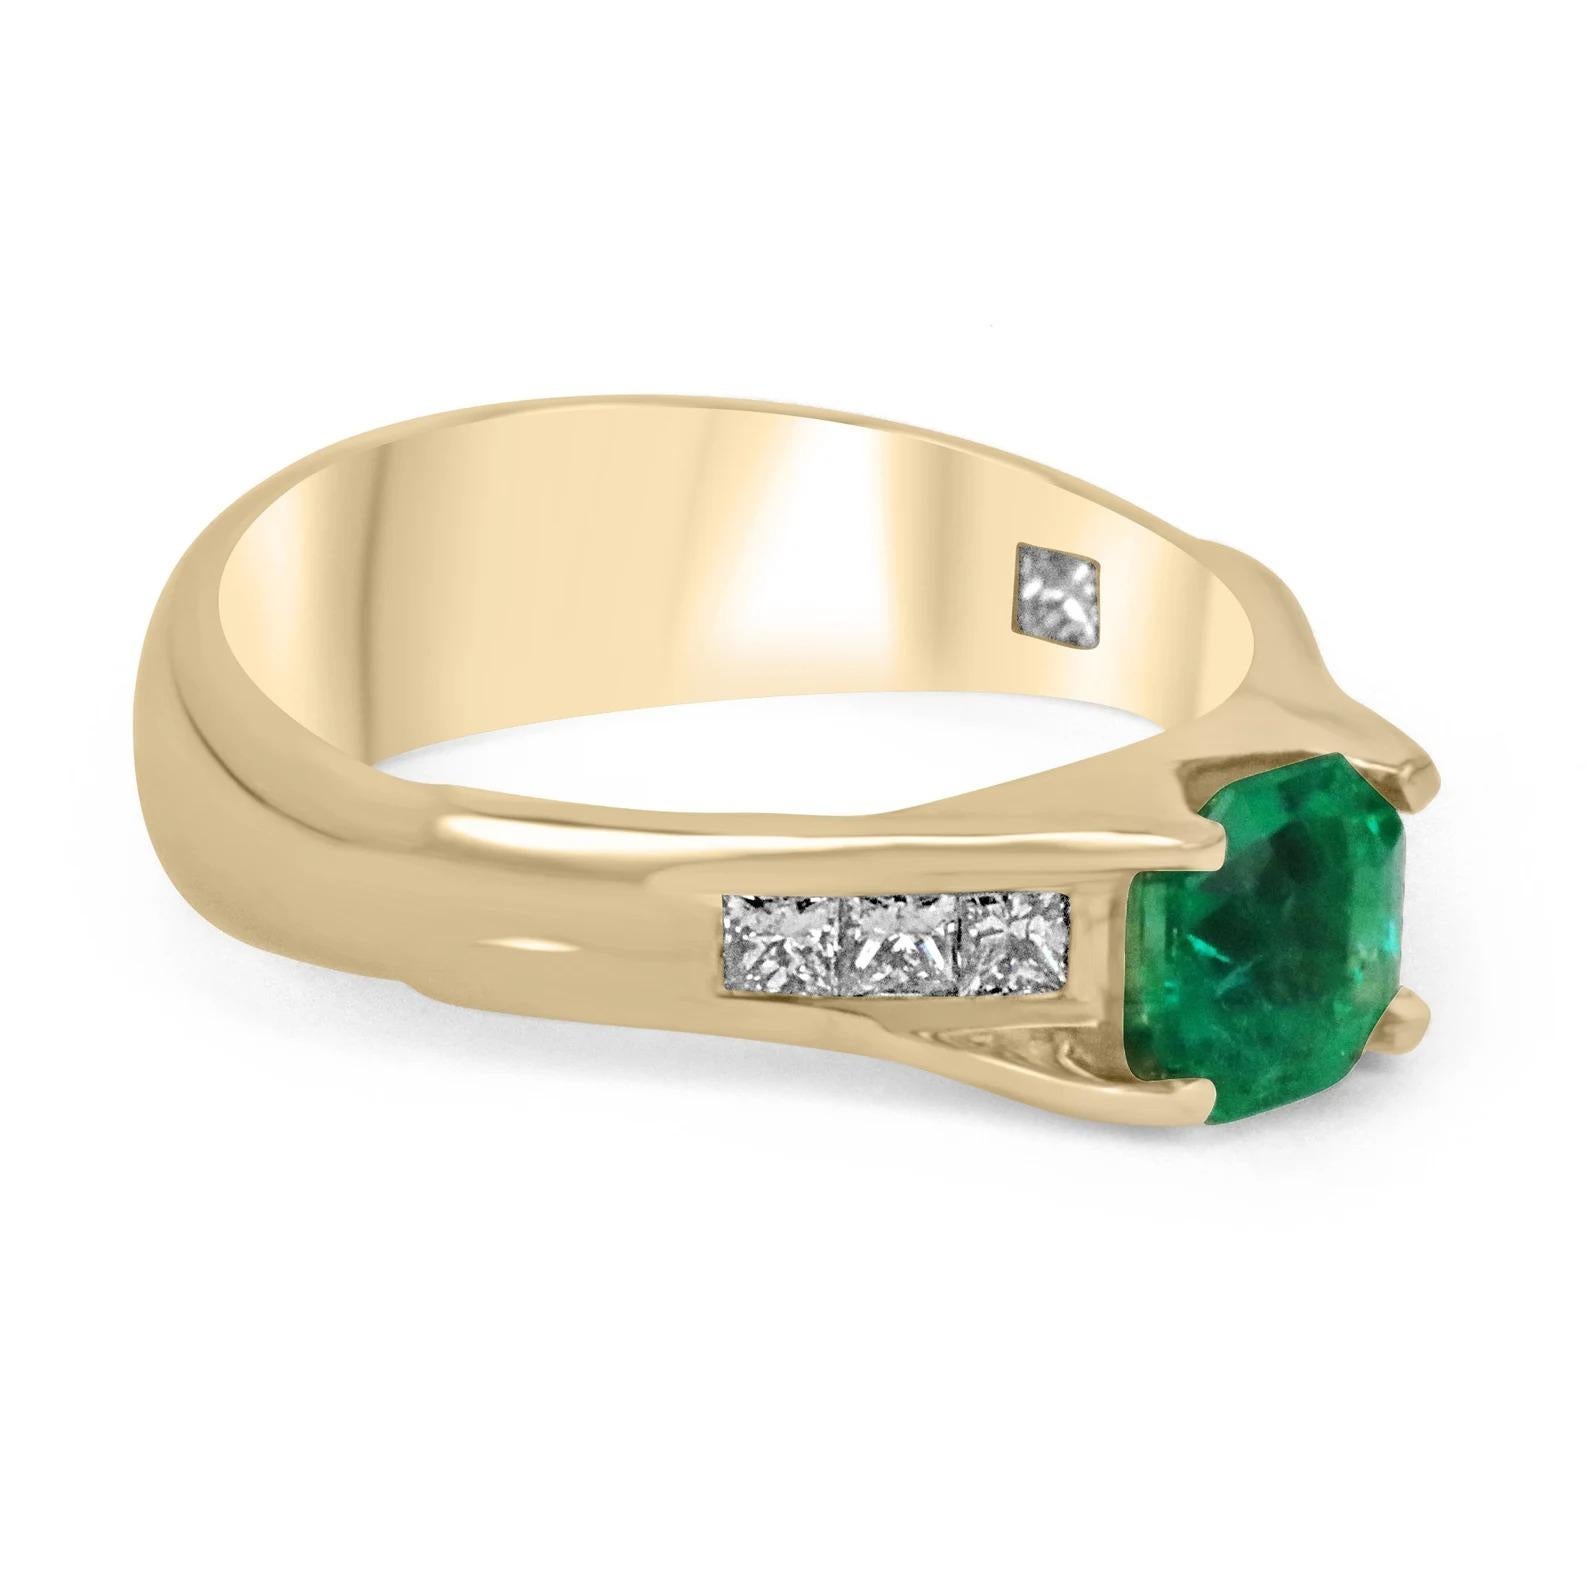 Indulge in this exquisite, fine-quality AAA Colombian emerald and princess diamond statement ring in solid 18K. The center stone features a 0.72-carat, natural rare Colombian emerald Asscher cut of high quality. Showcasing an impressive and